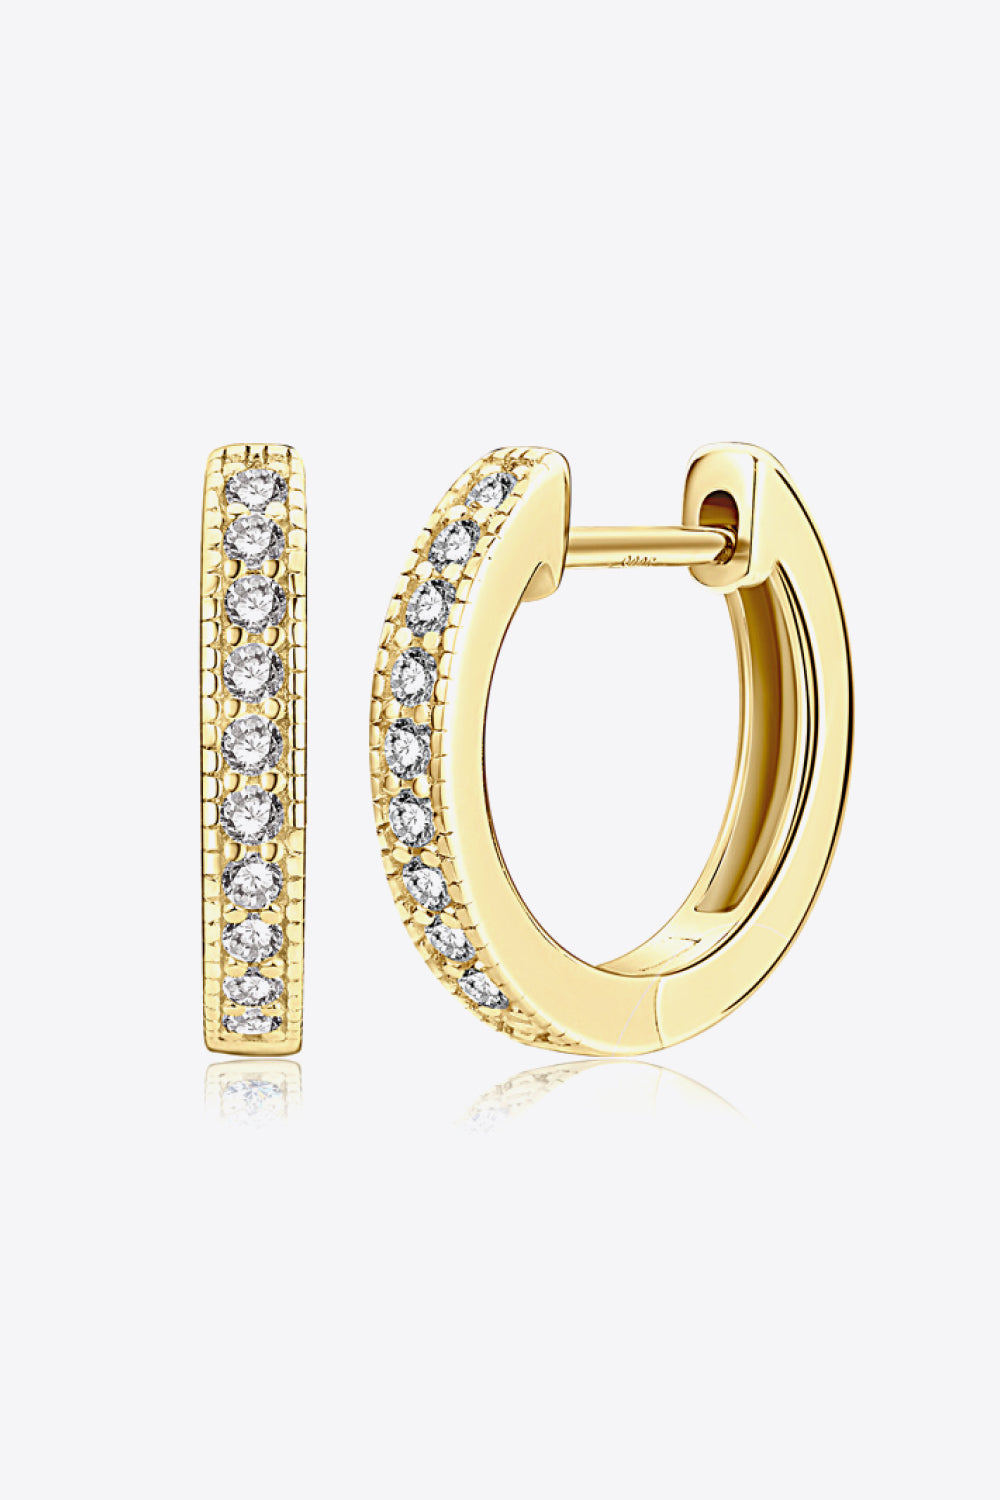 GOLD ONE SIZE - Inlaid Moissanite Hoop Earrings - in gold or silver - earrings at TFC&H Co.